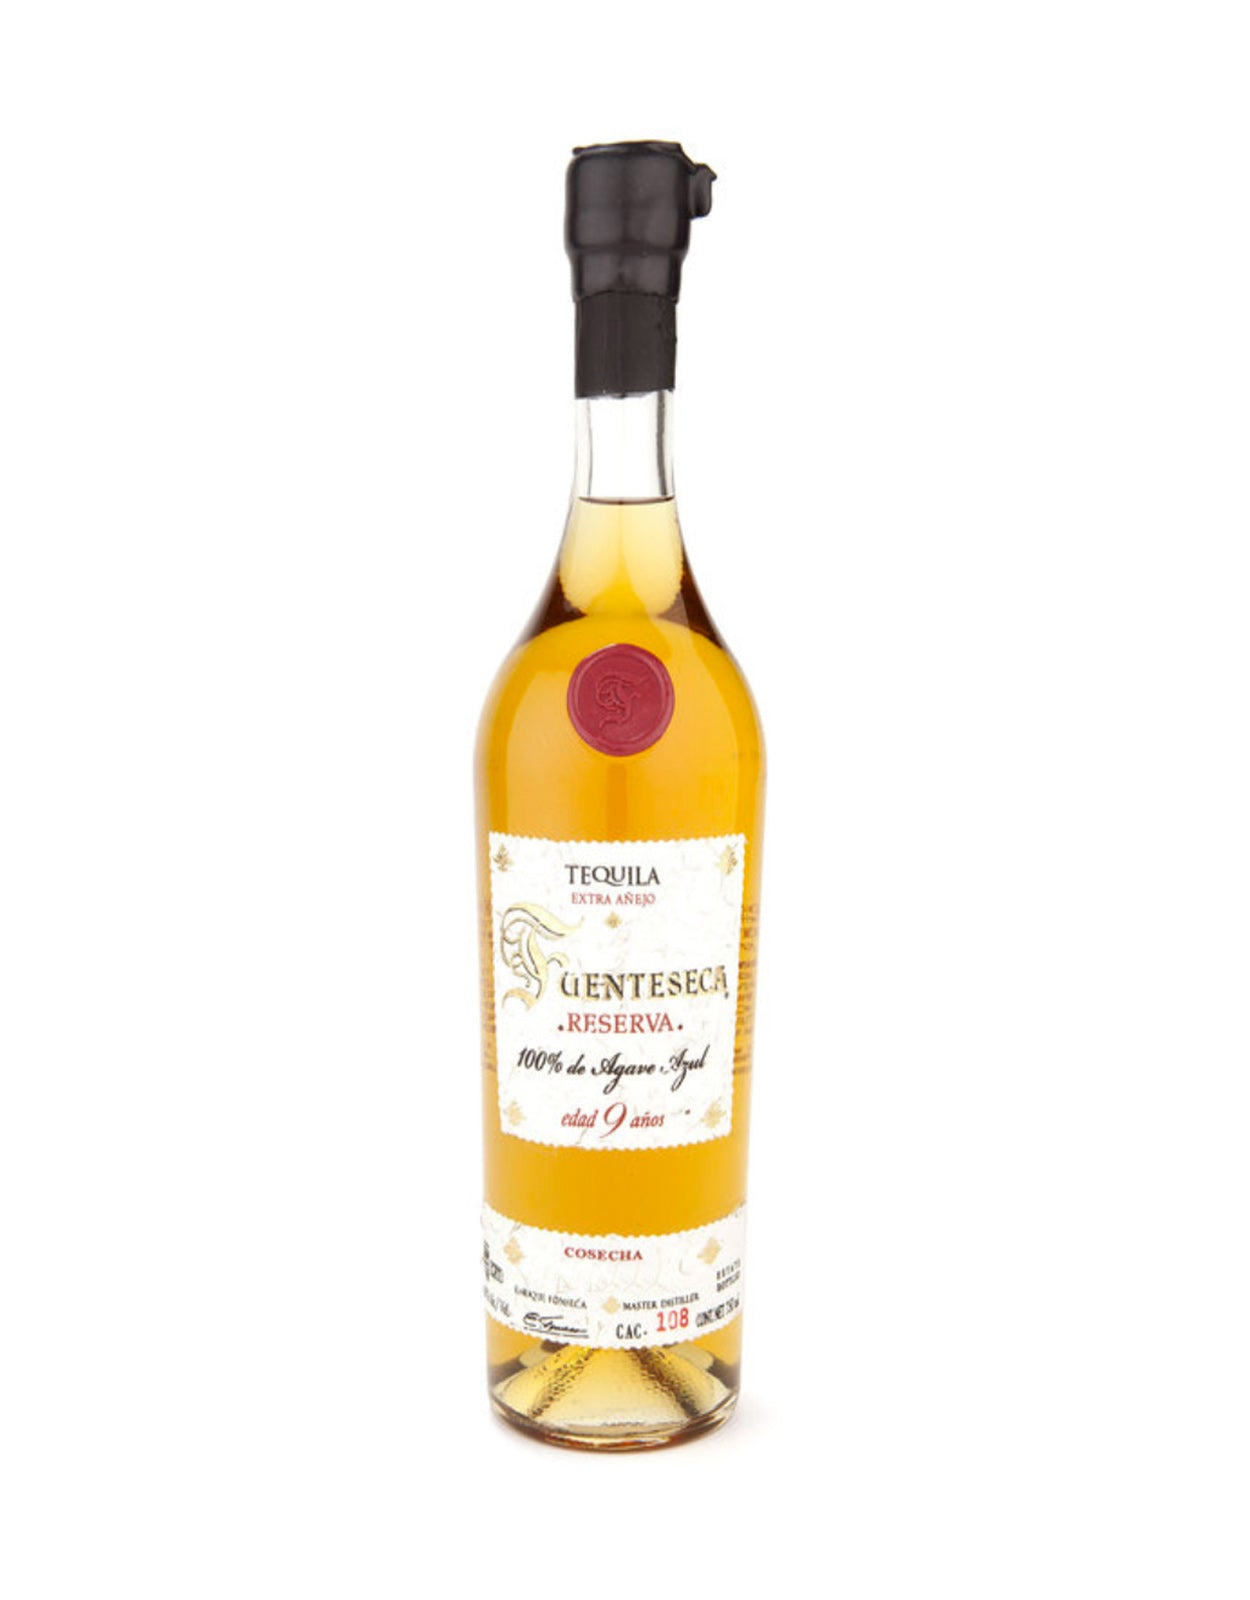 Tequila Fuenteseca Extra Anejo 9 Year Old